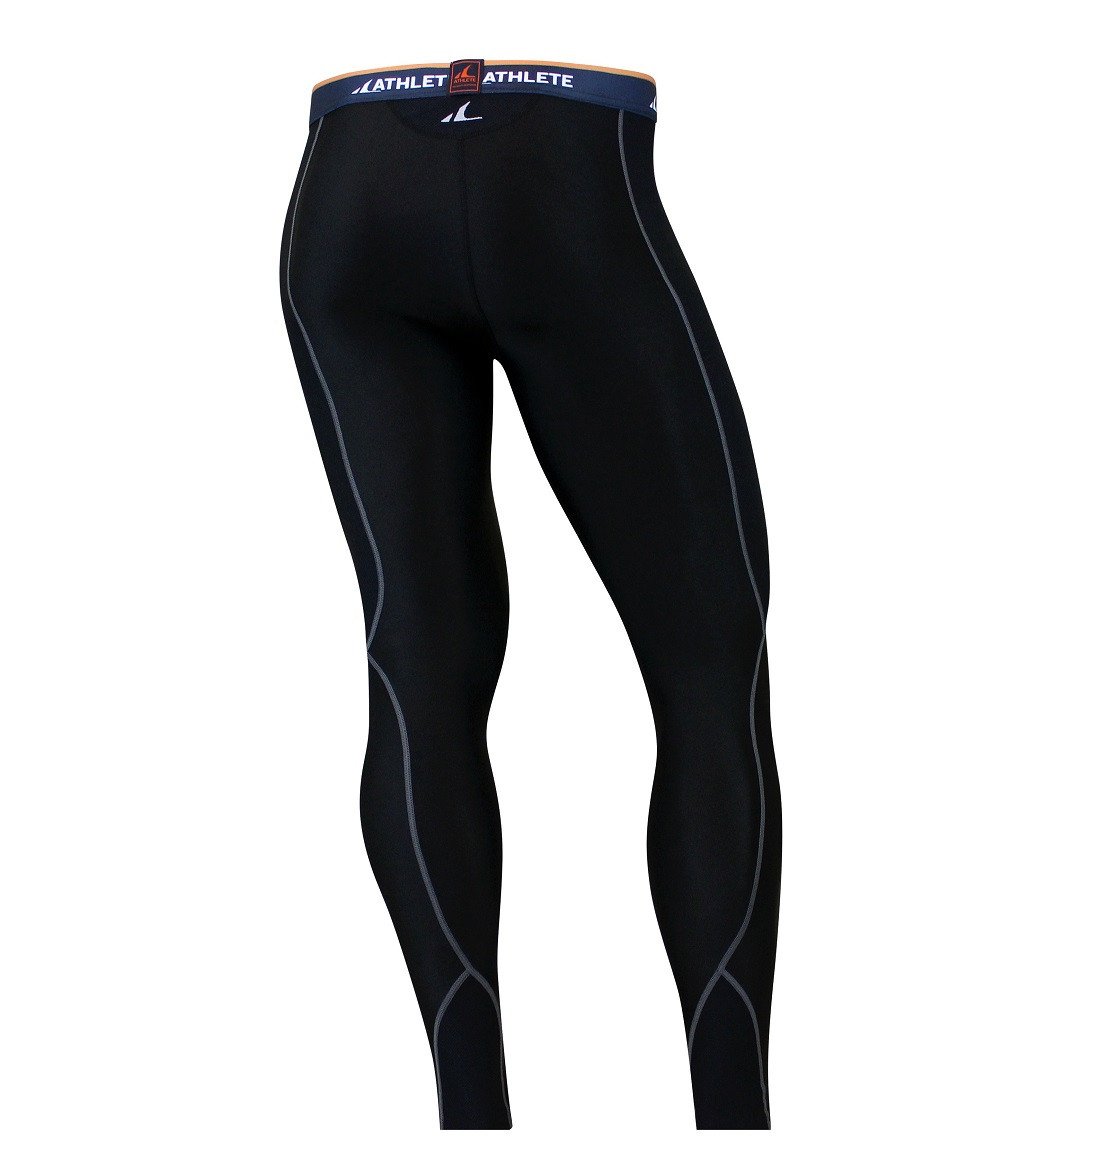 Under Armour Track Pants 1160